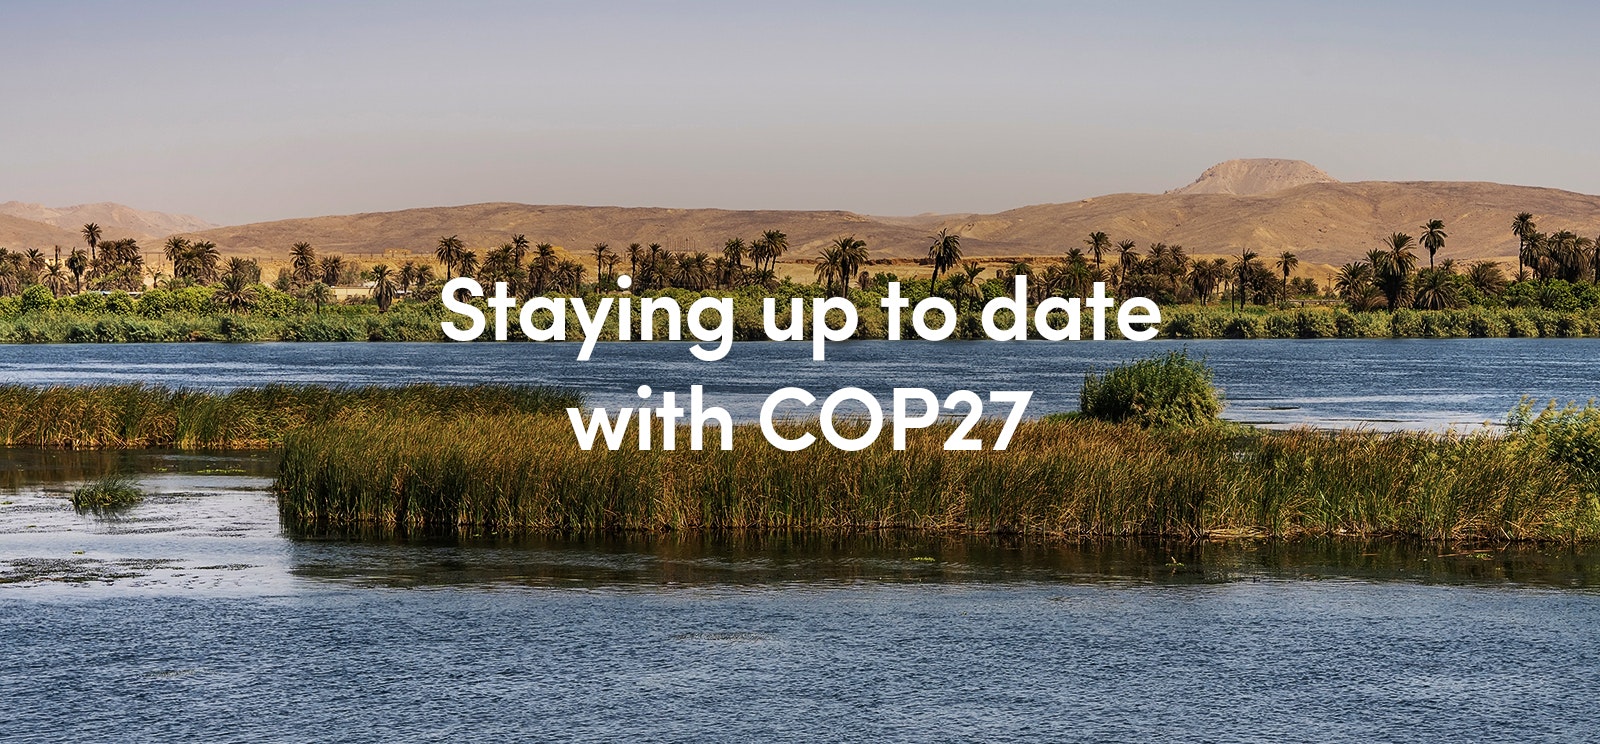 Staying up to date with COP27